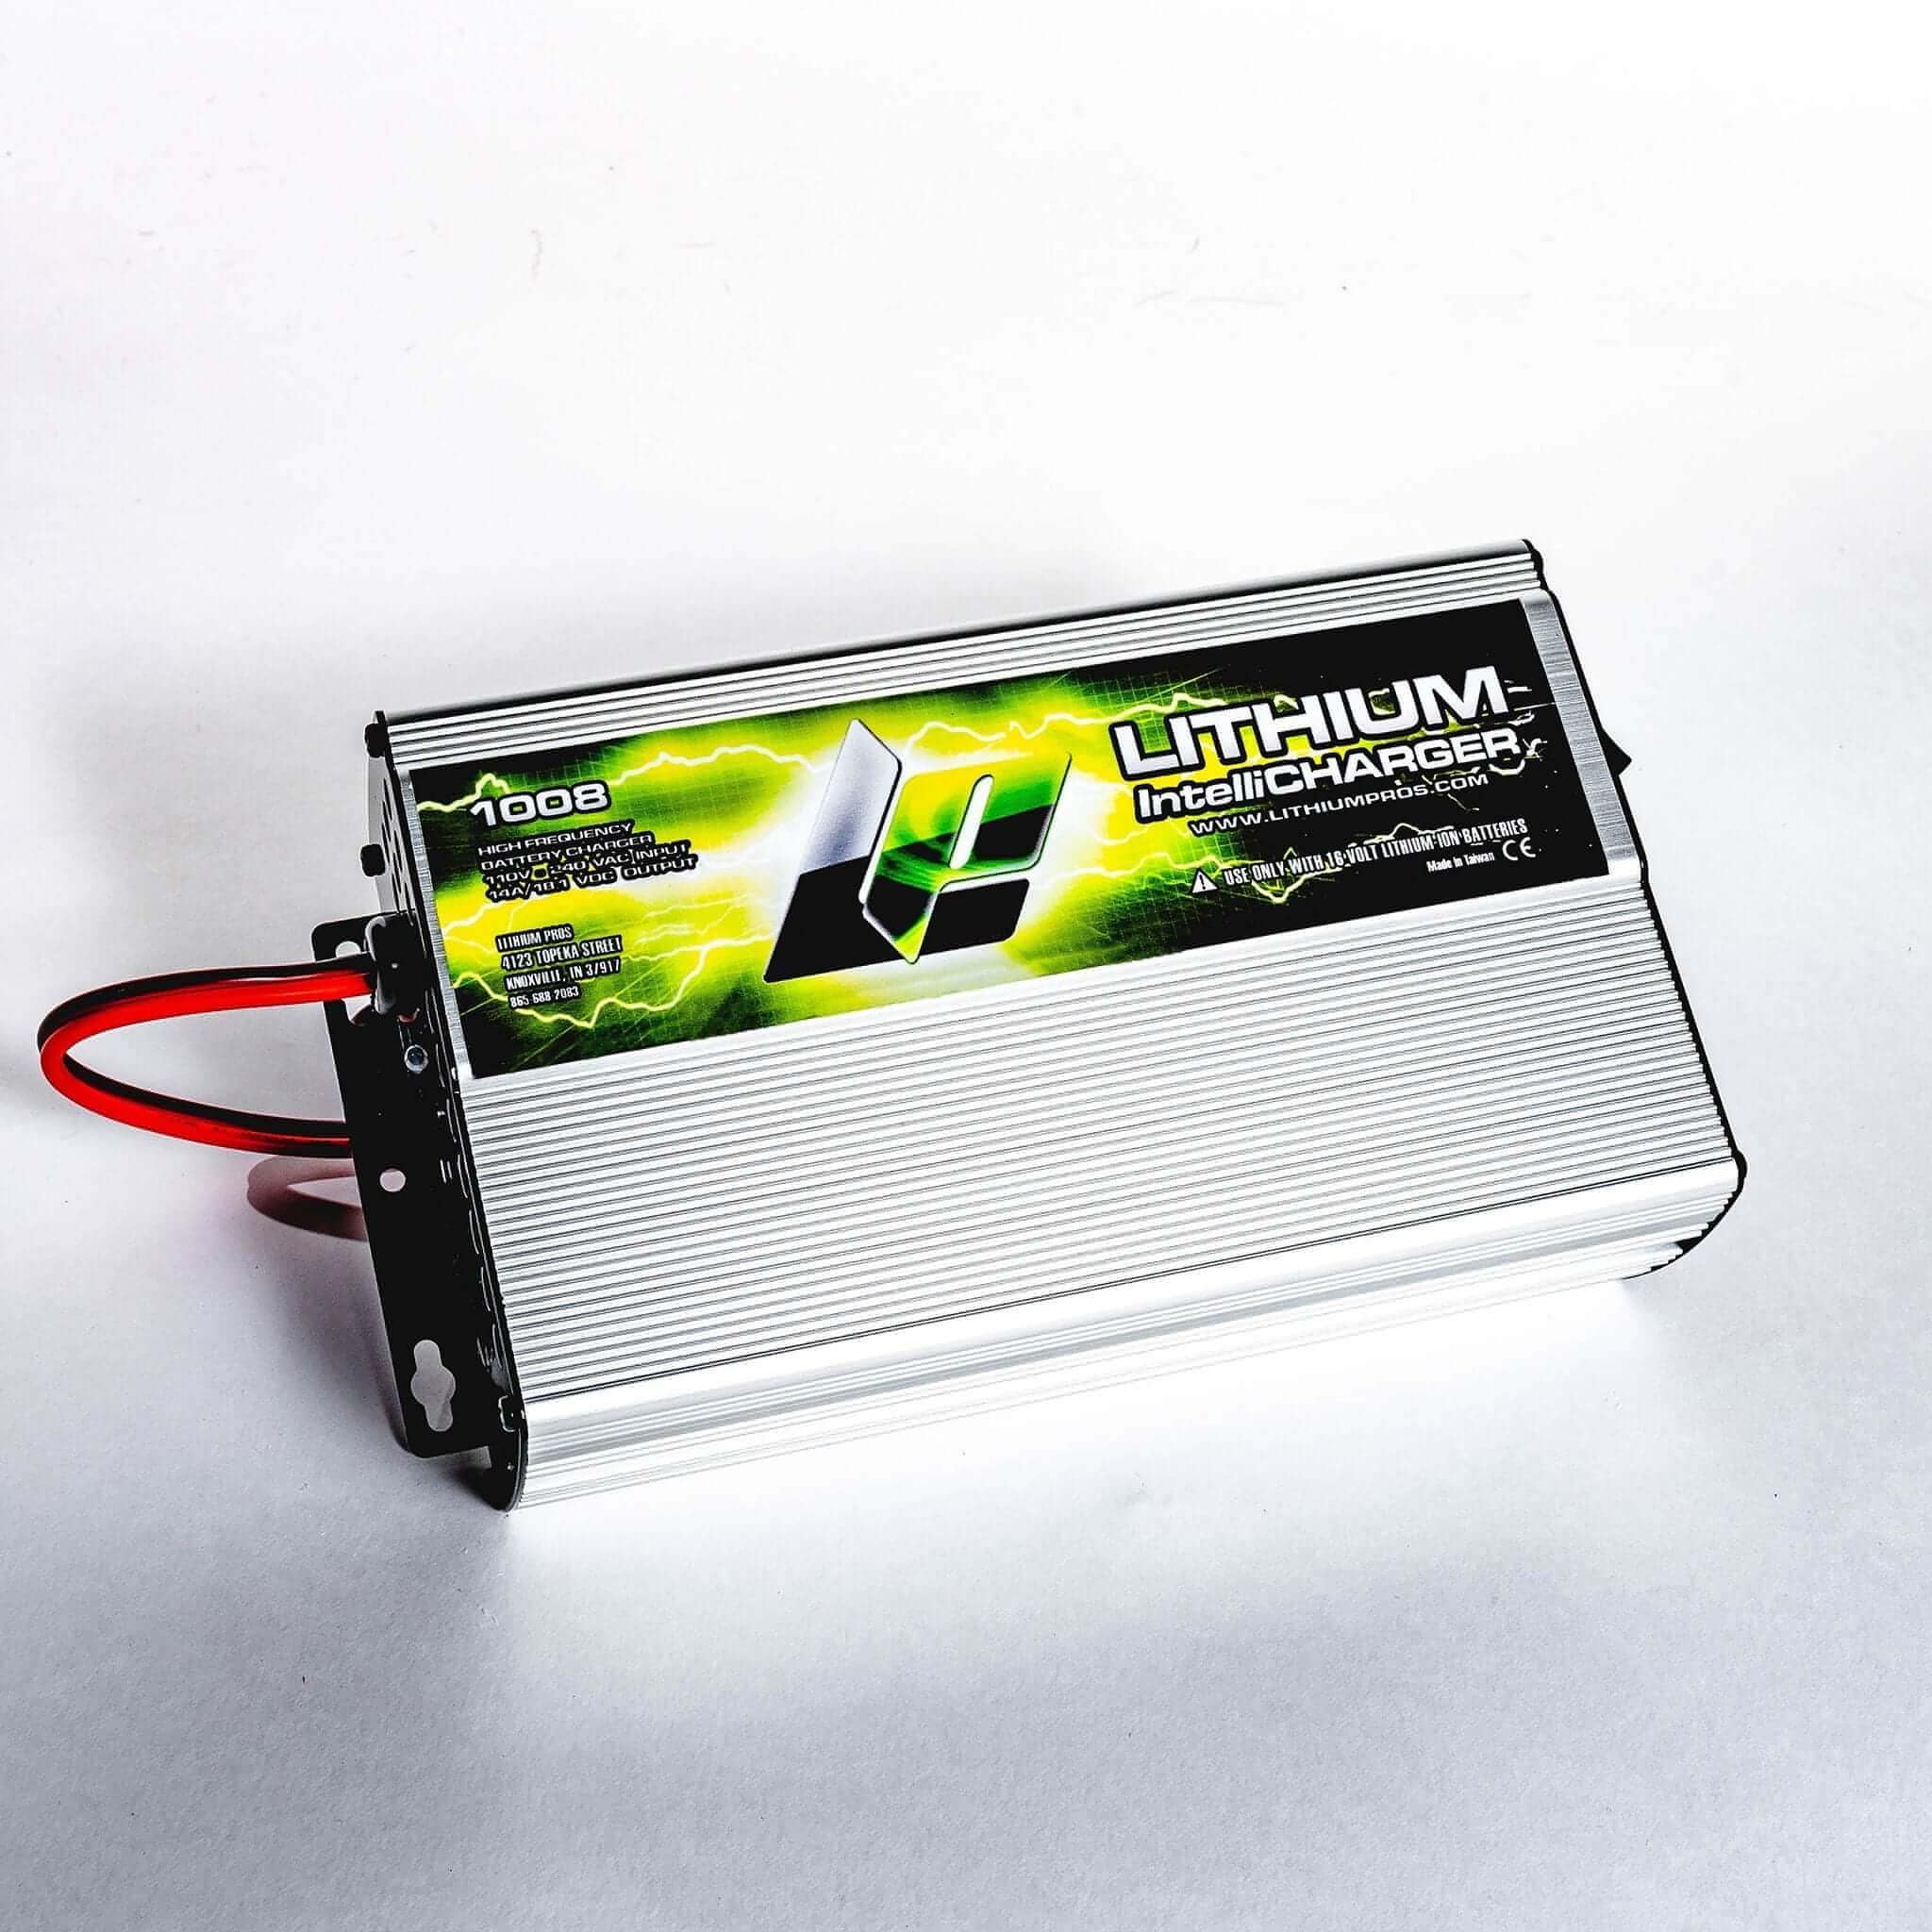 http://lithiumpros.com/cdn/shop/products/1008-16v-15a-lithium-ion-racing-battery-charger-889795.jpg?v=1659541525